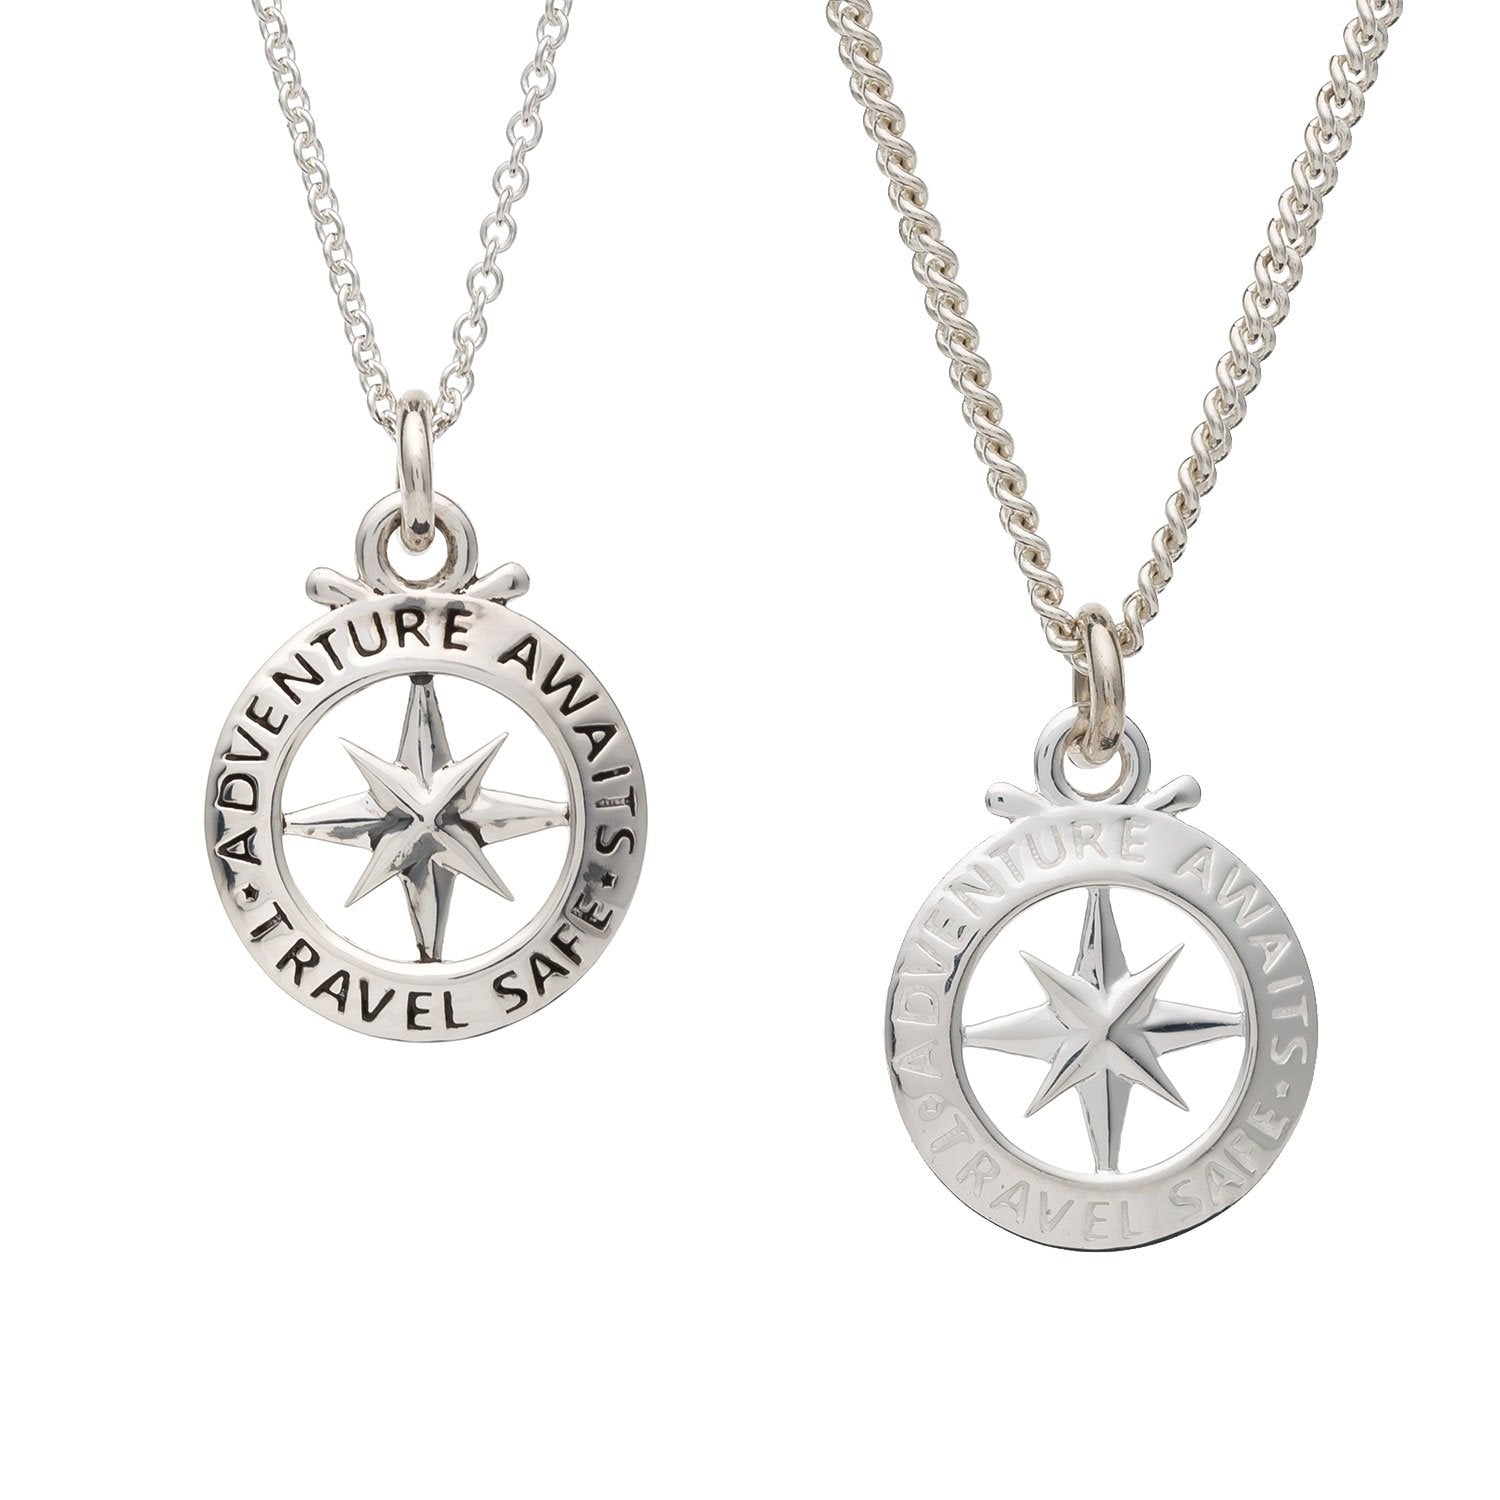 Small man's compass necklace alternative to a St Christopher travel gift from Off The Map Jewellery